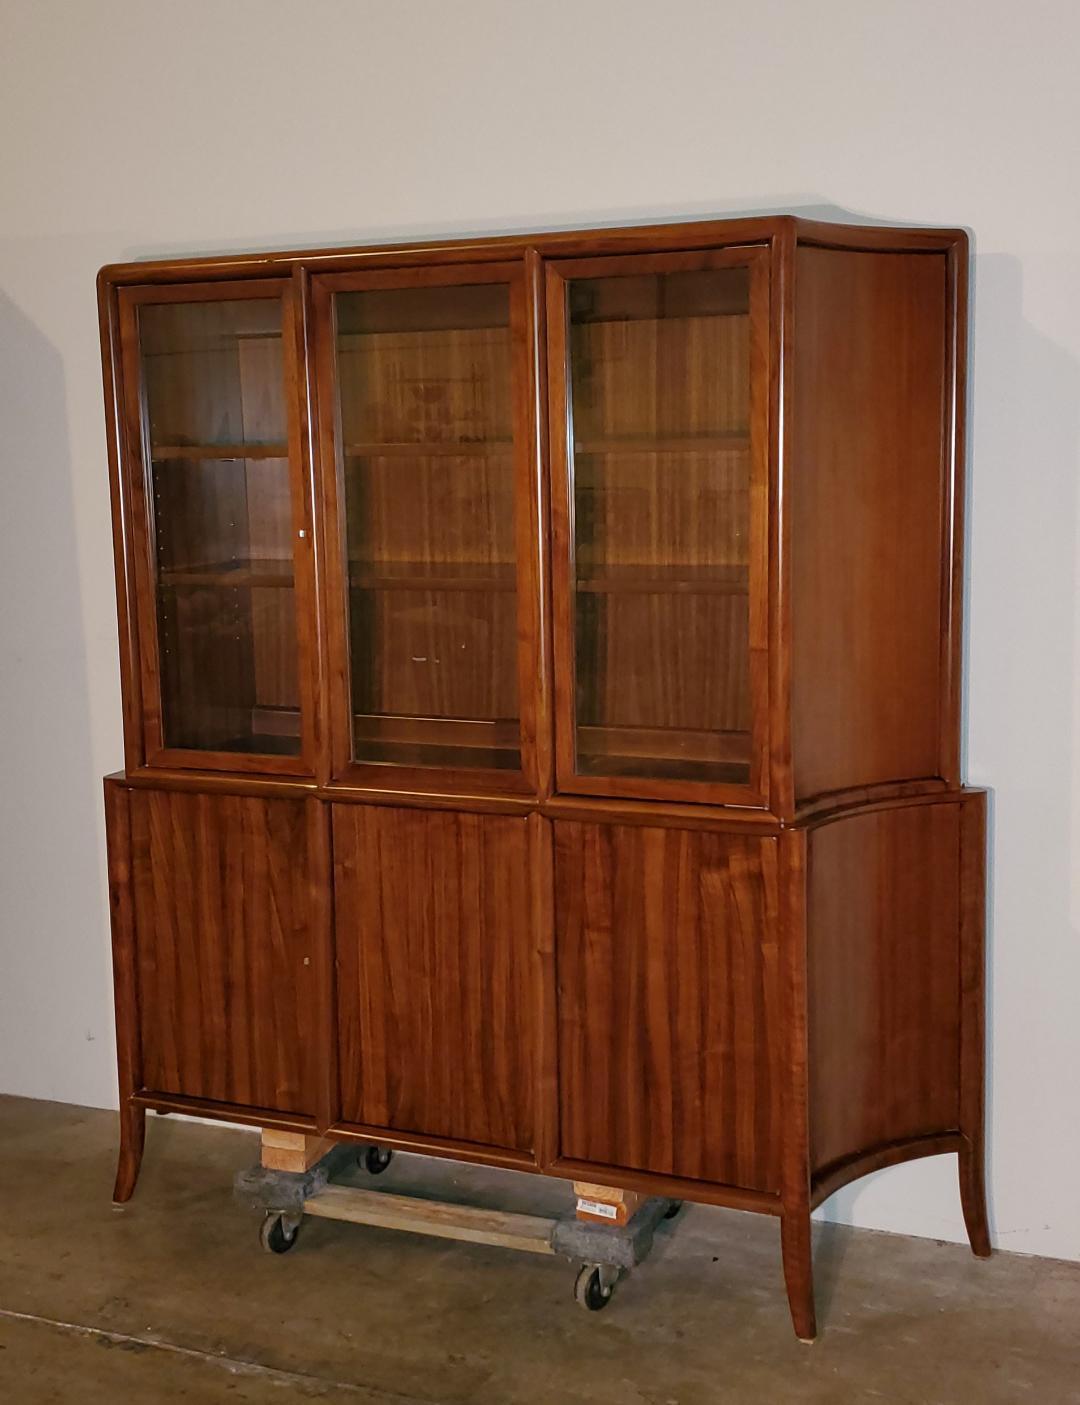 This T. H. Robsjohn Gibbings Is A Mahogany Bowed Front Credenza, With Tapered Sides, Sabered Legs, Glass Top Cabinet/Hutch, Brass/Bronze Pulls And Shelving Top And Bottom.

This Gorgeous Mahogany Cabinet Has Ample Storage Both Top And Bottom And Has